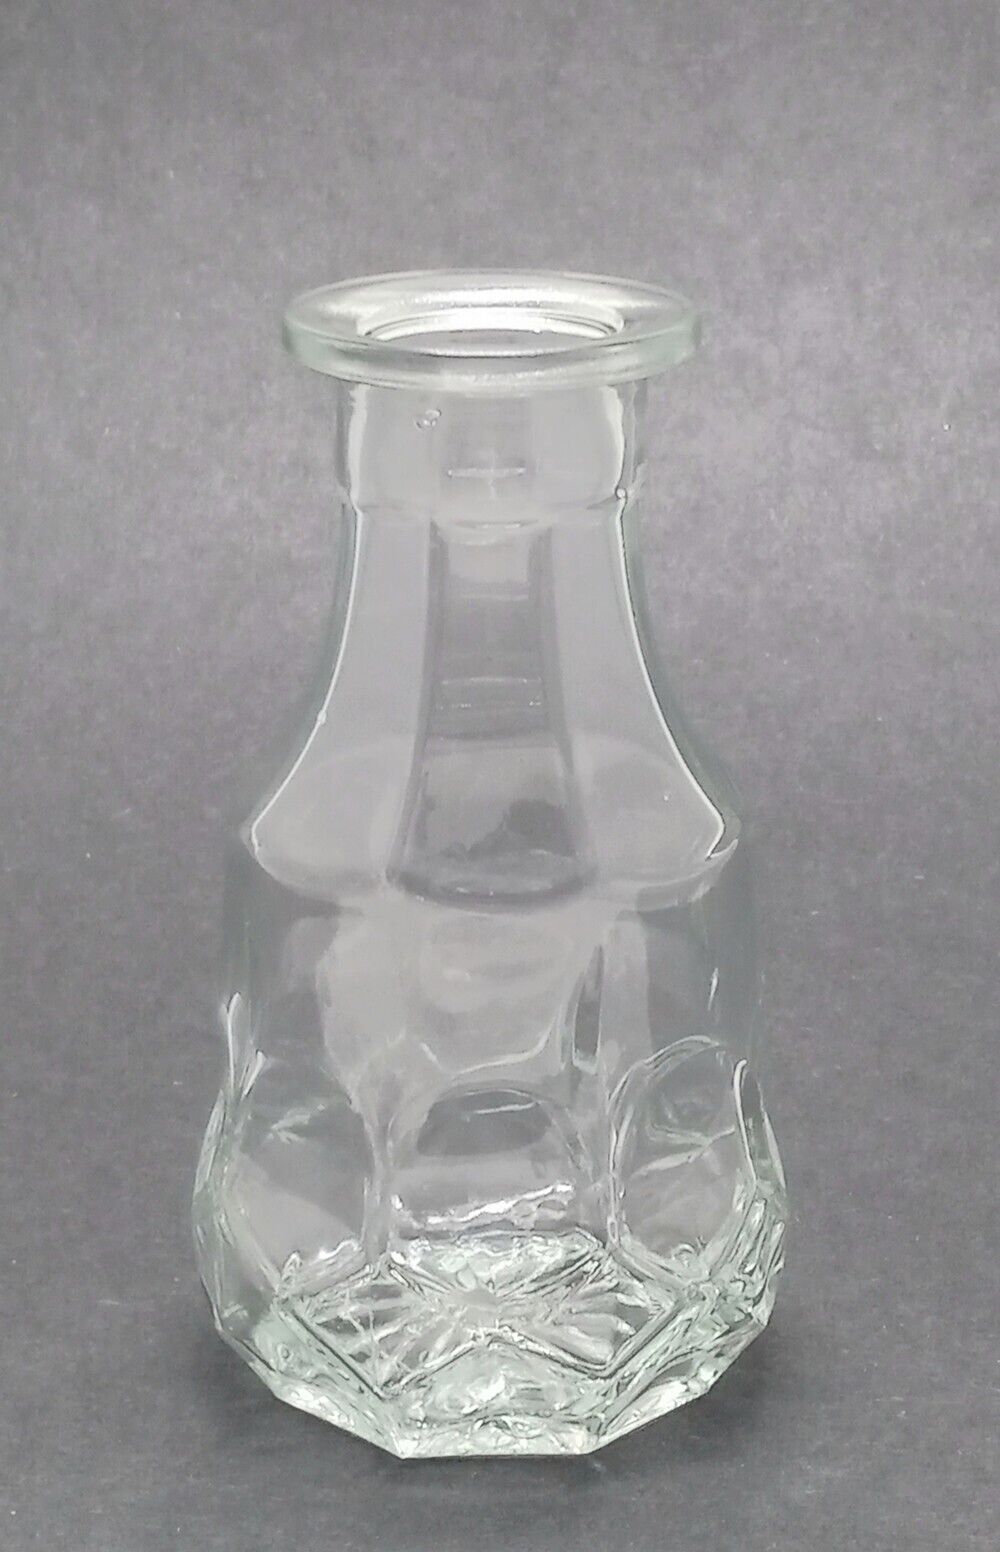 Small Clear Concaved RIbbed Design Glass Collectible Round Bud Vase H = 5.5 inch